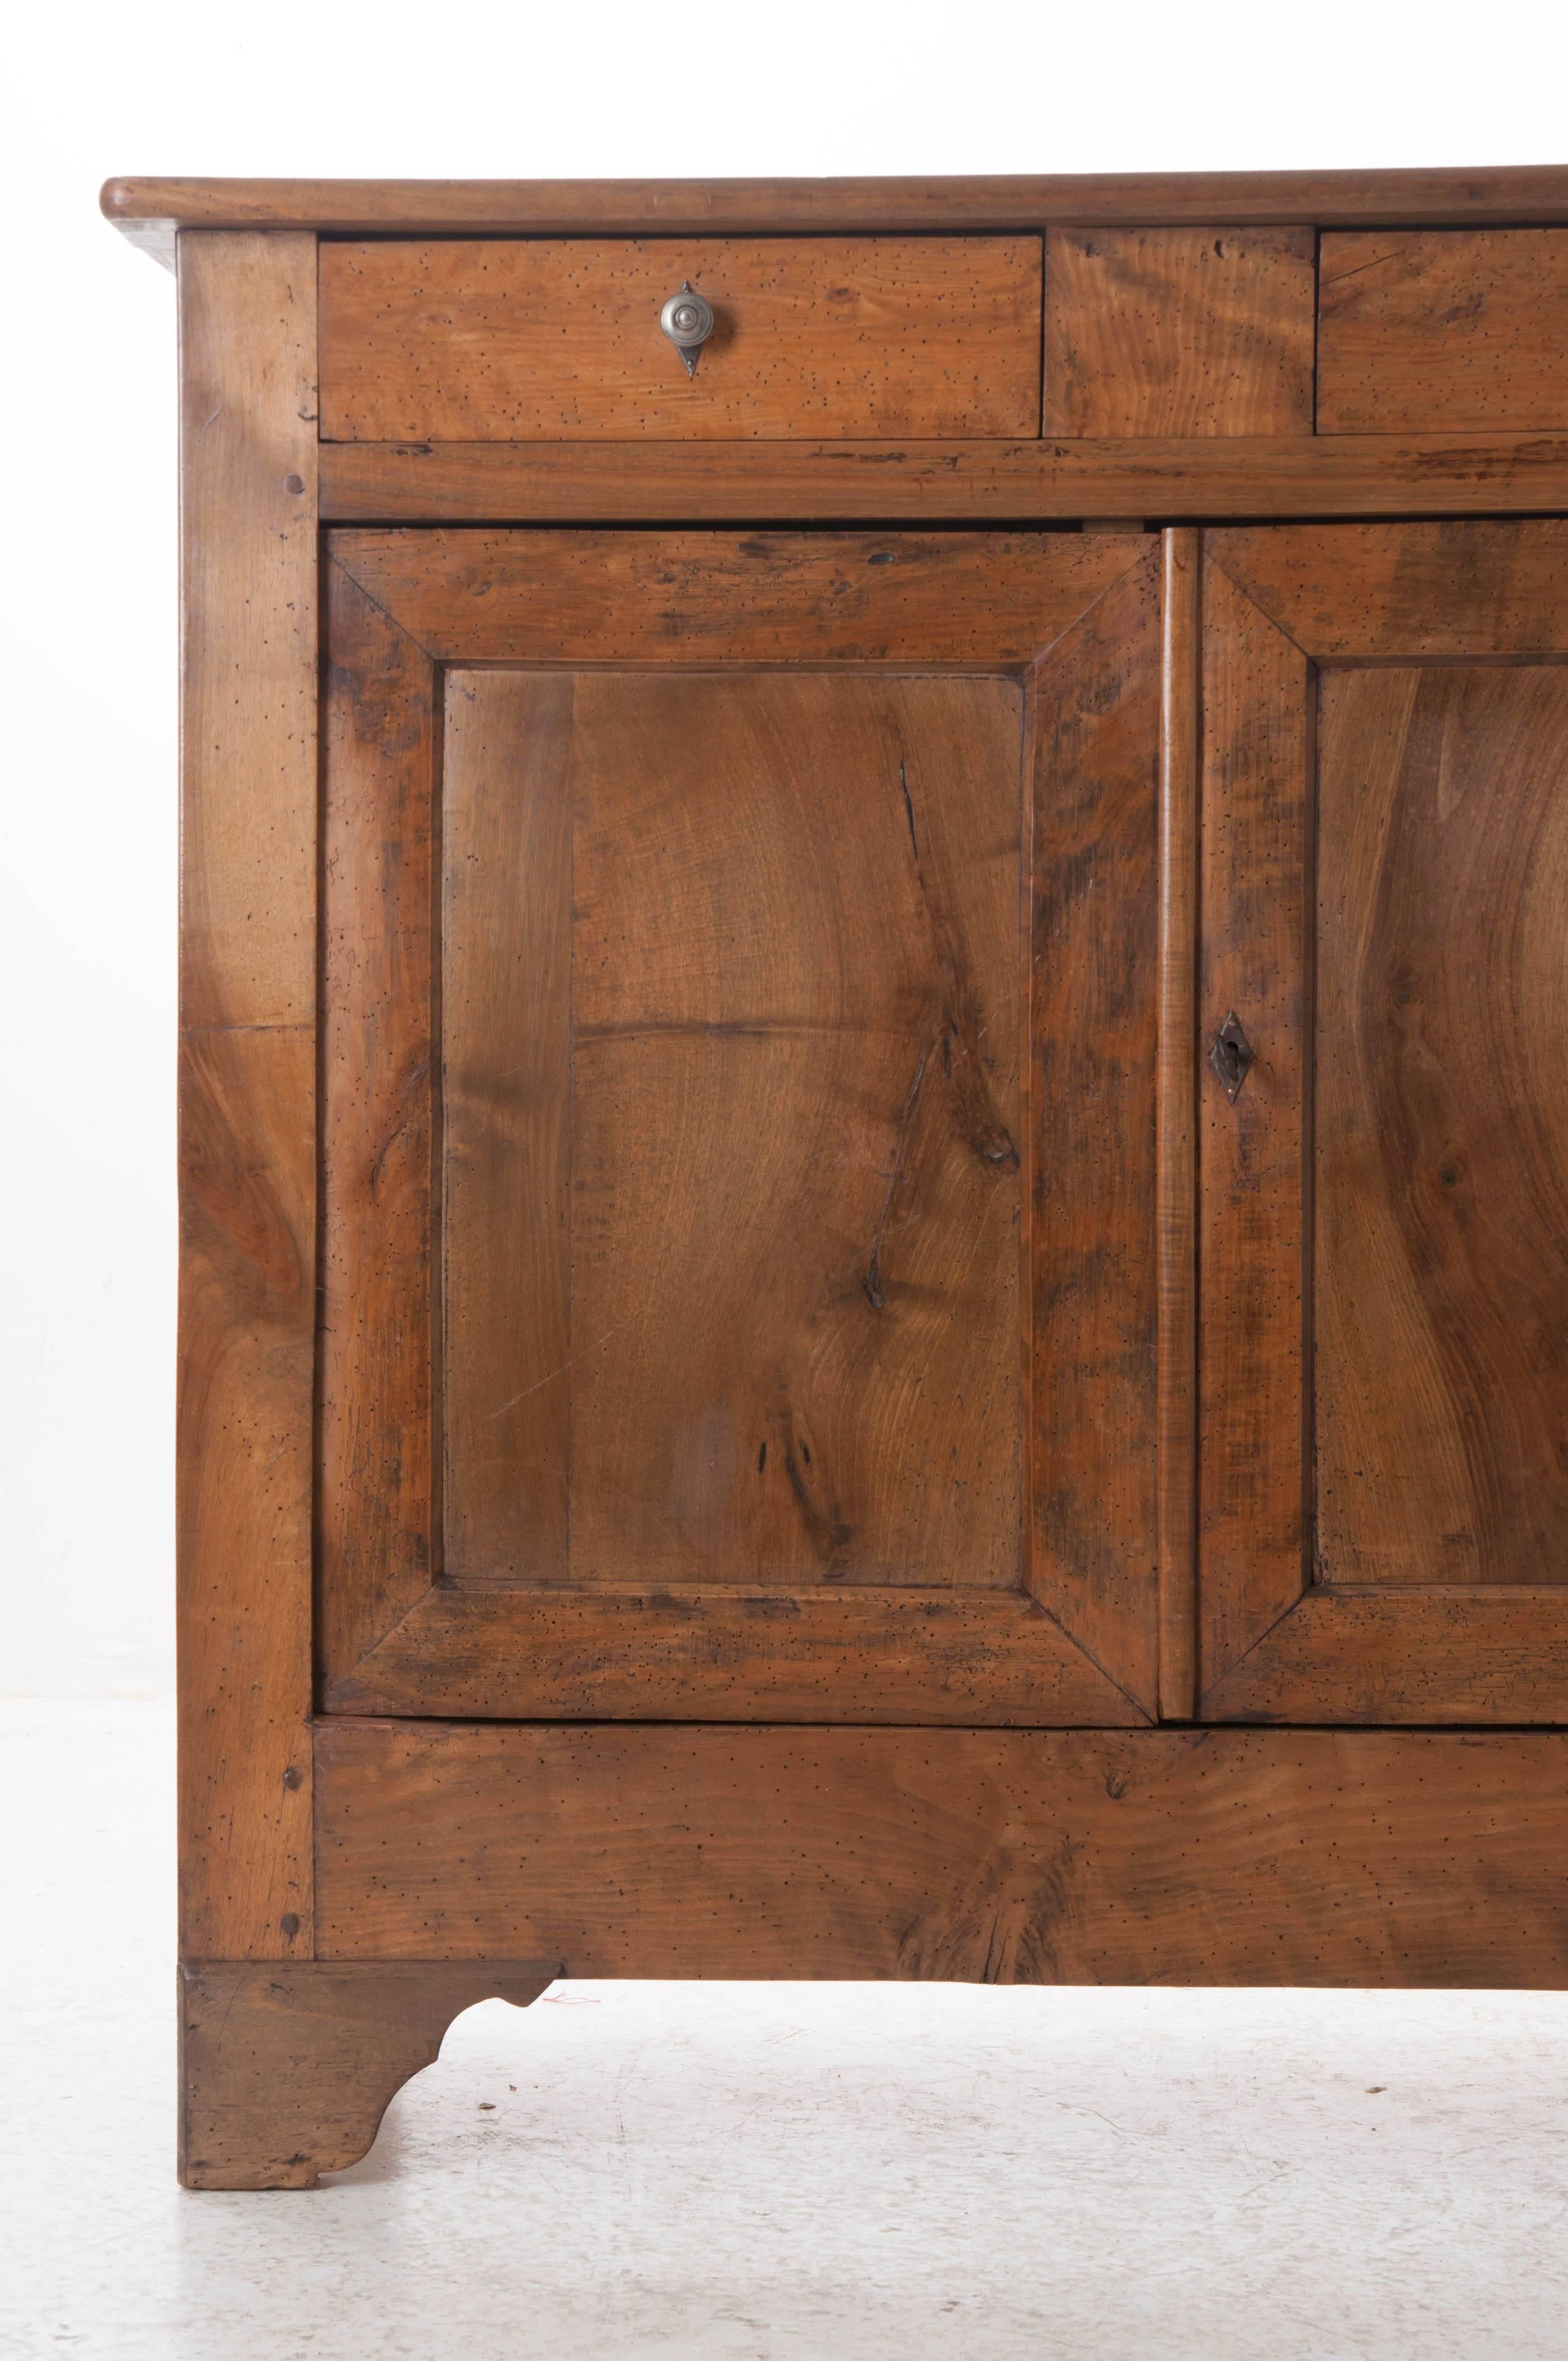 A delightful, tall French Louis Philippe buffet composed of solid walnut, pine and oak. This lightly toned buffet is designed with clean, straight lines, making this, and all Louis Philippe style pieces, extraordinarily versatile. The buffet has two